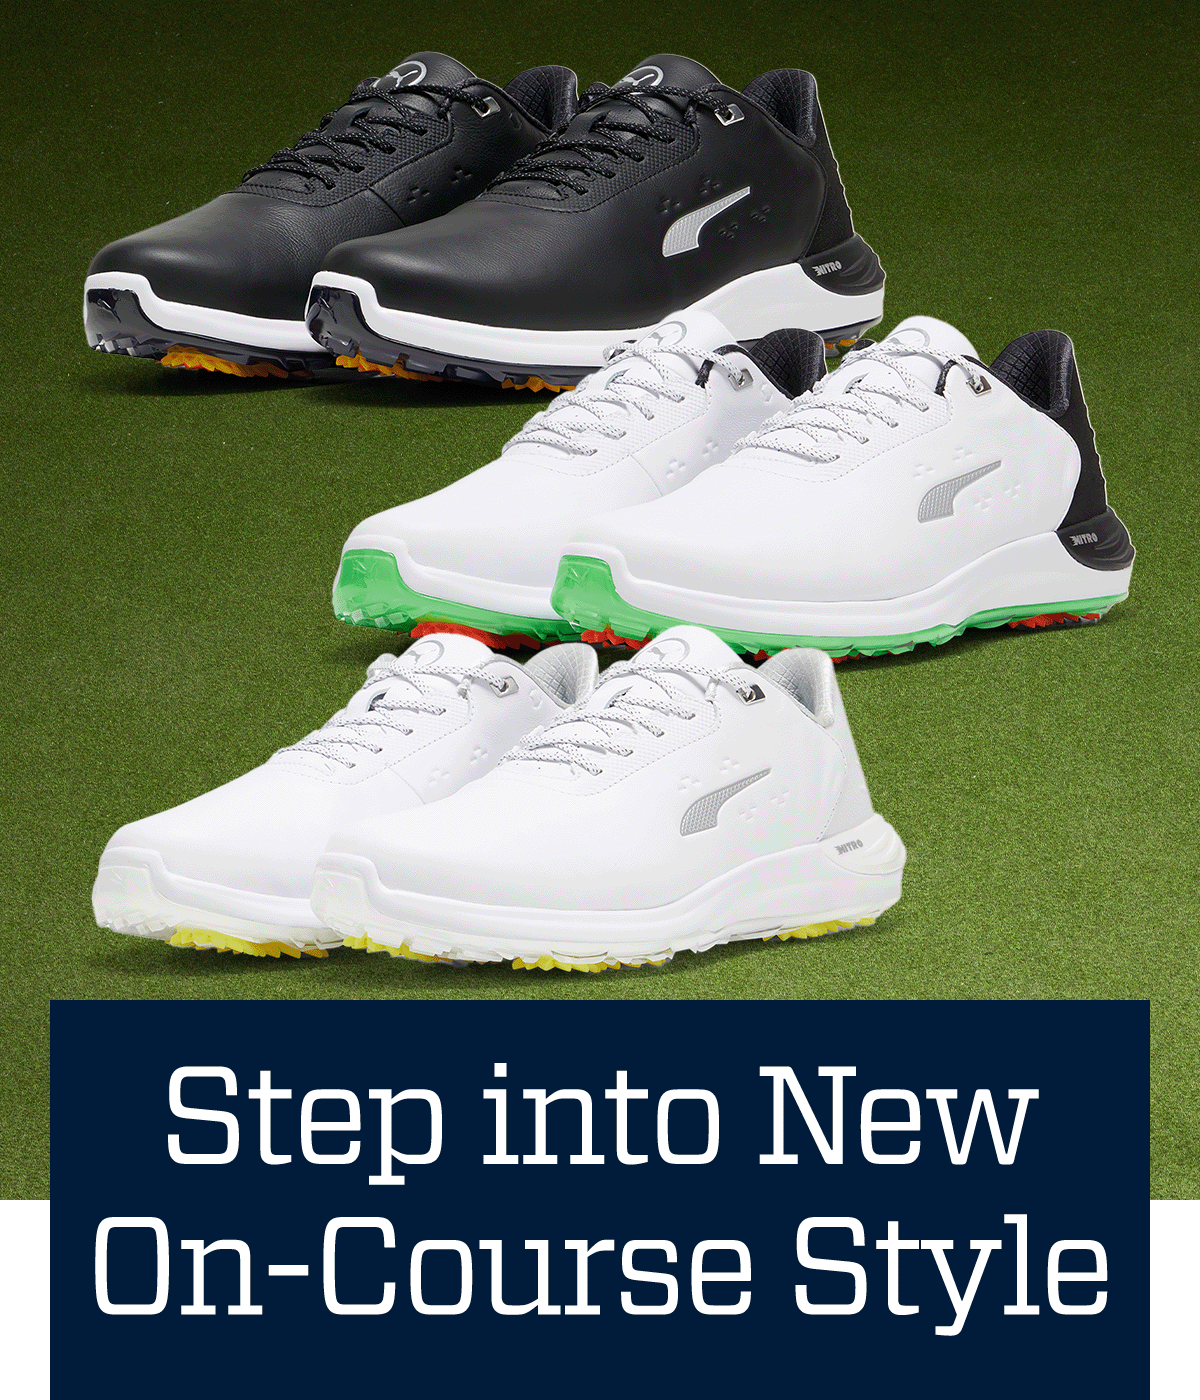 \xa0Step into new on-course style.